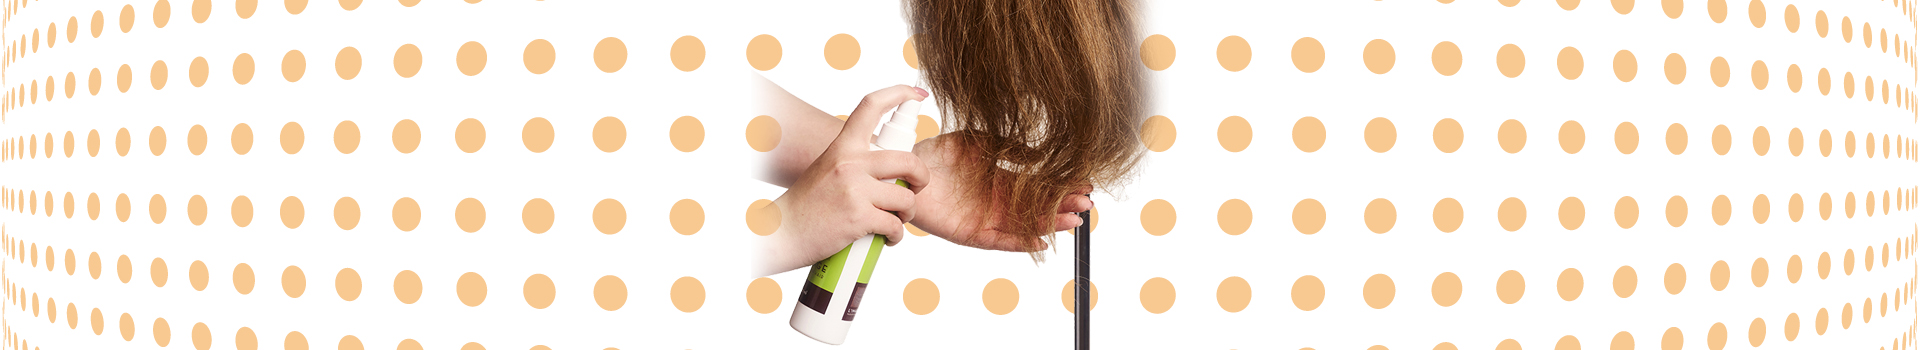 Hair tips of a hairdressing doll are treated with spray care